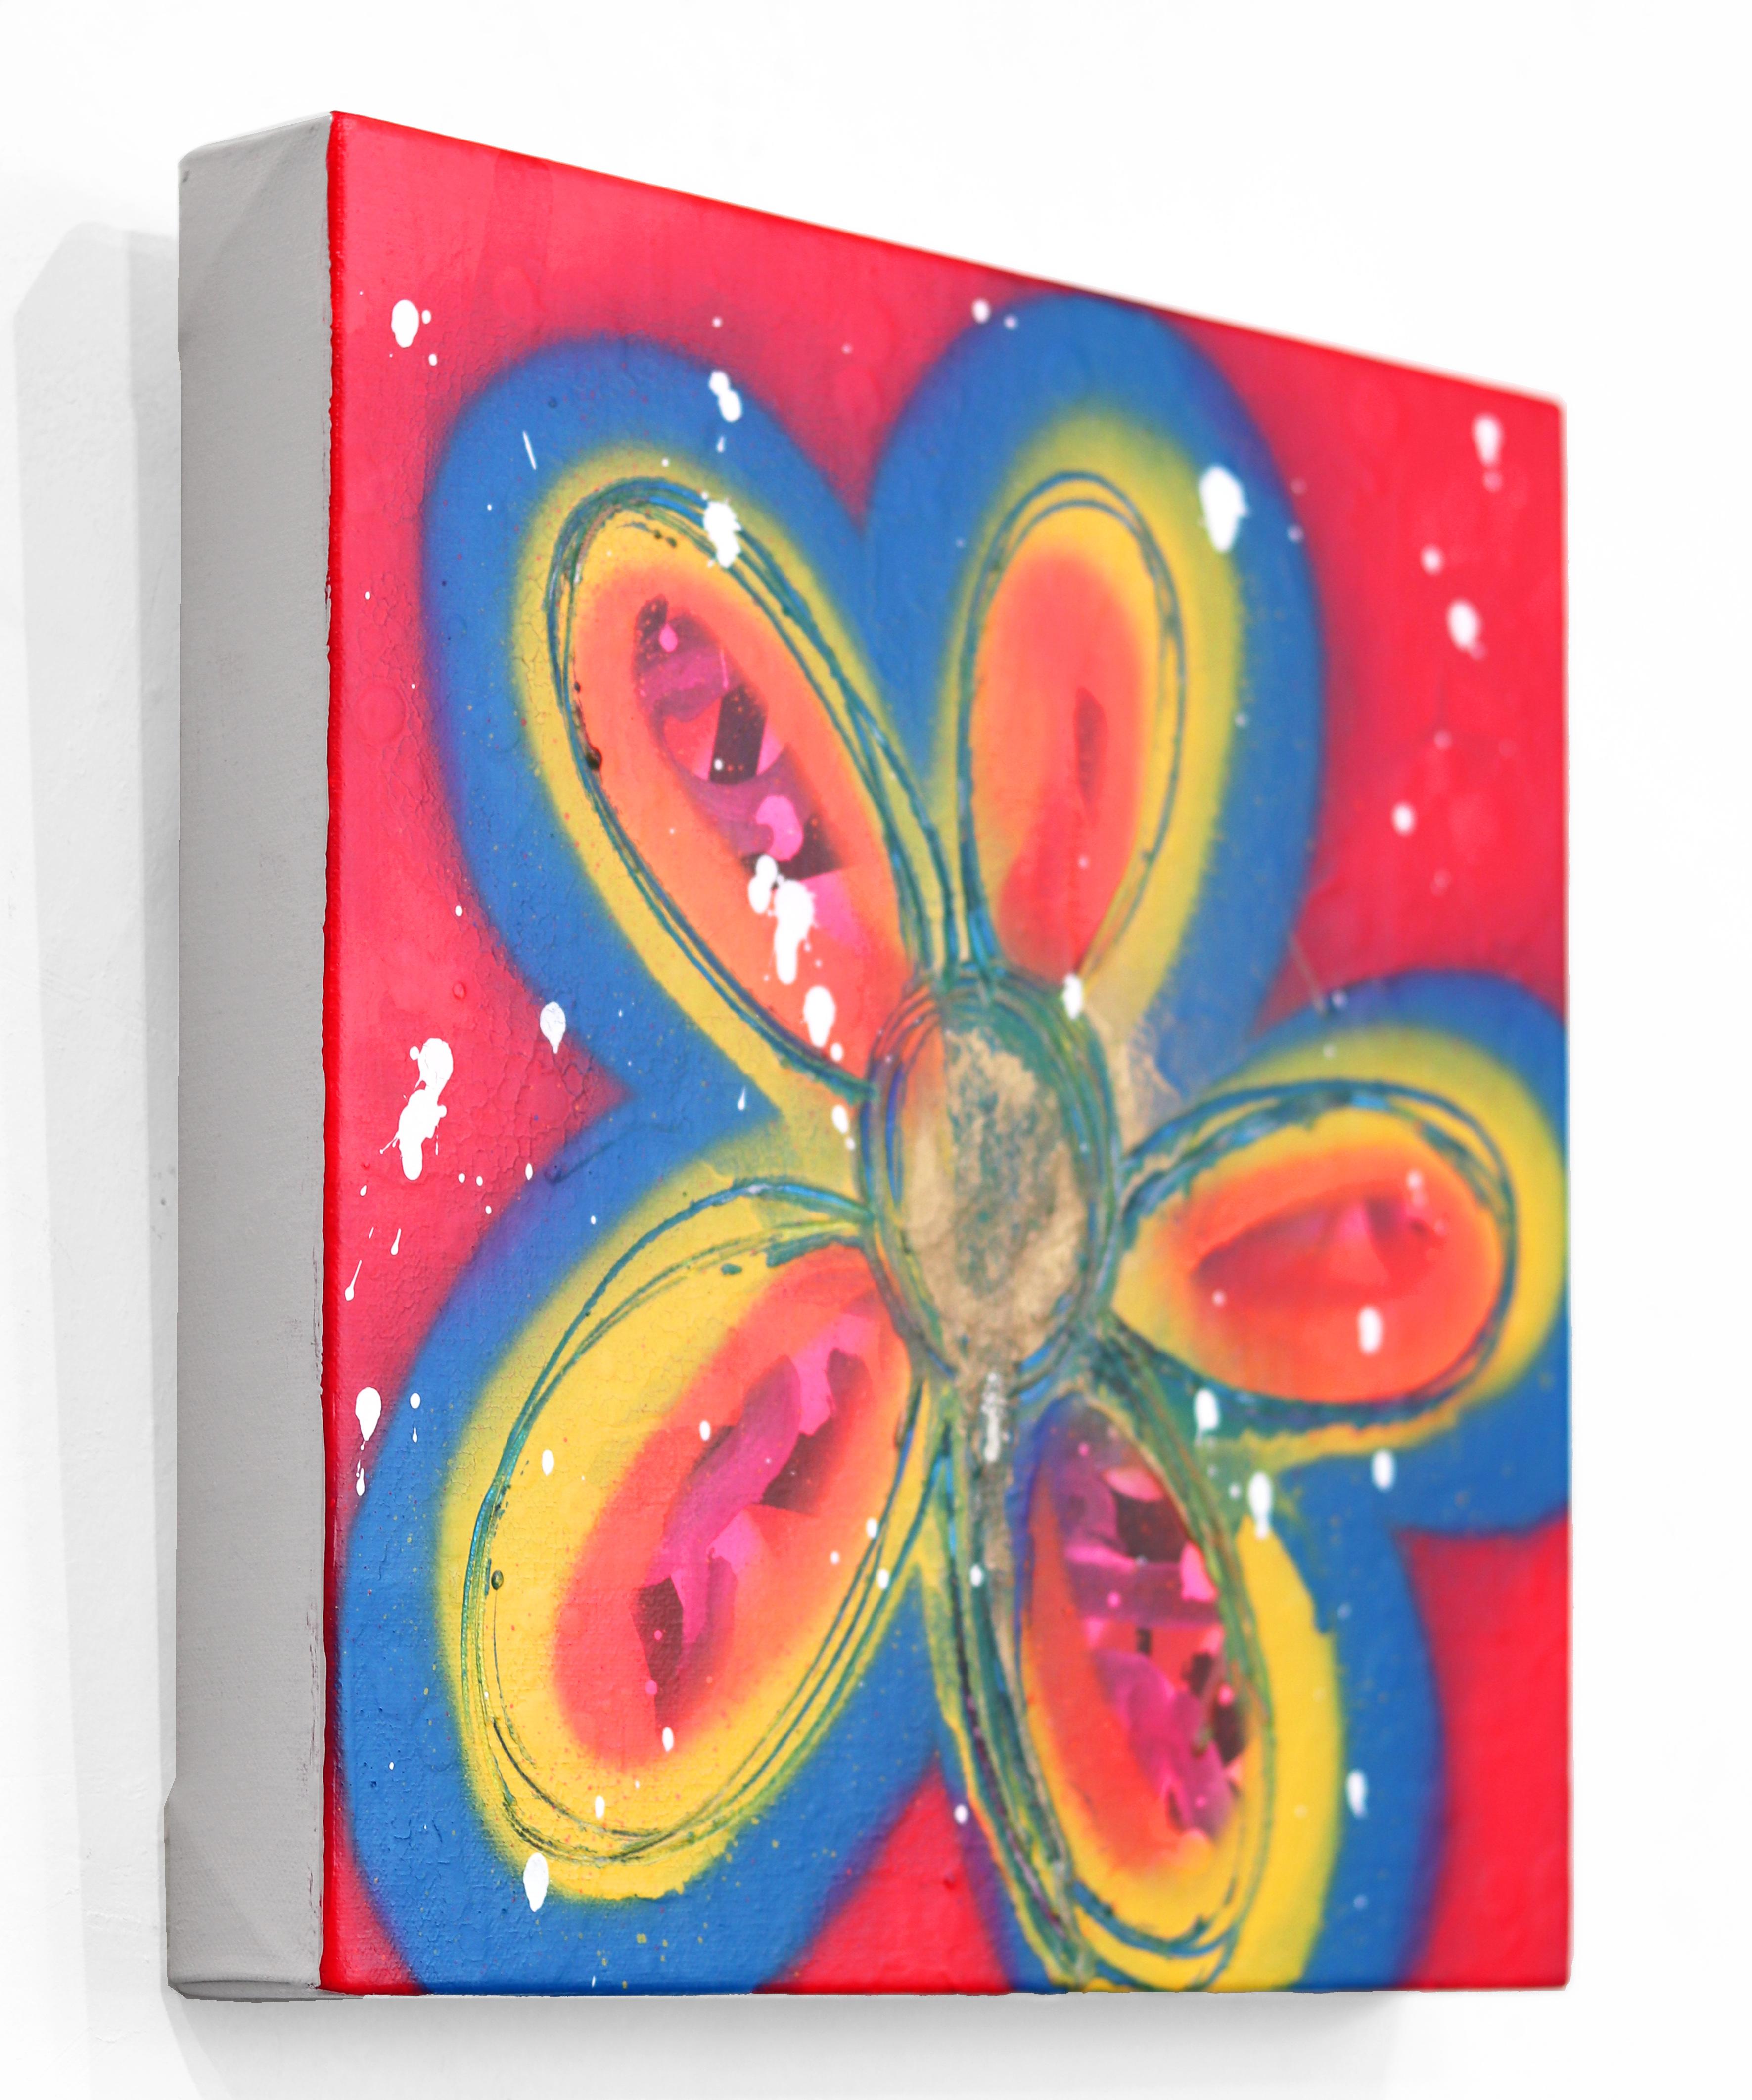 Show Your Radiance - Original Colorful Urban Love Pop Street Art Painting For Sale 2